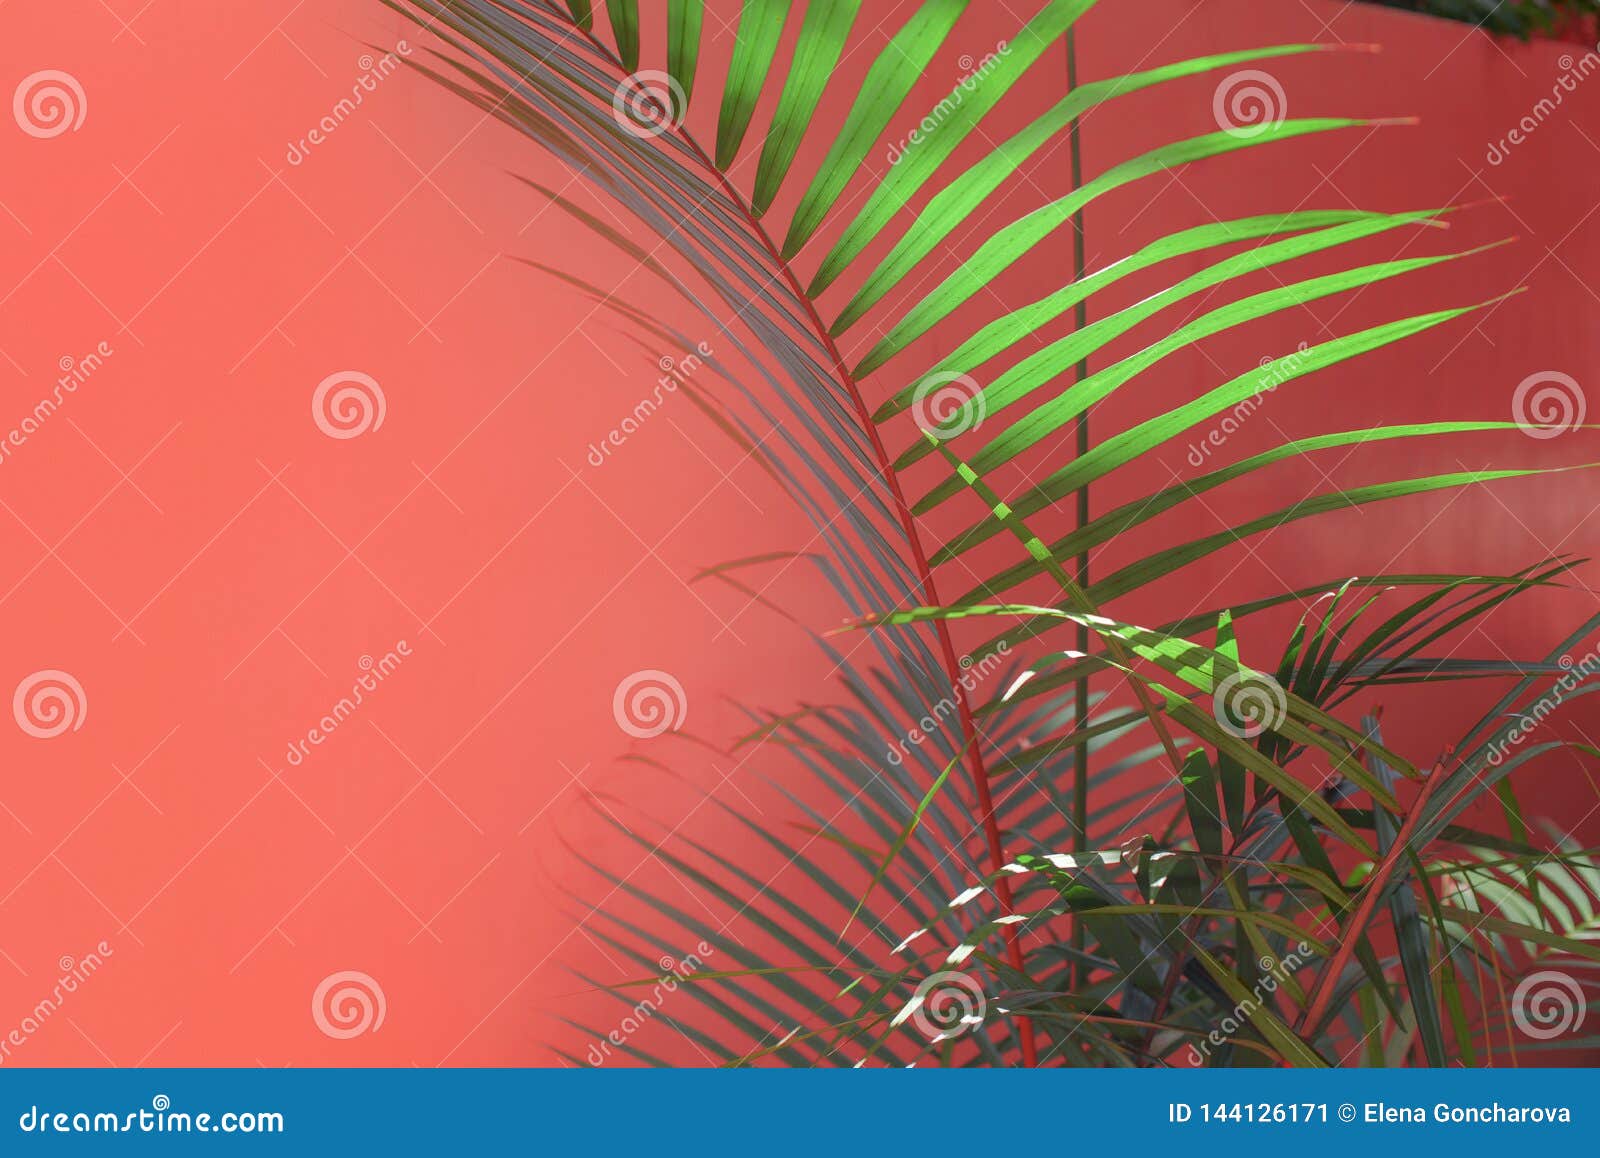 Beautiful Green Palm Branches Illuminated by the Sun. Stock Image